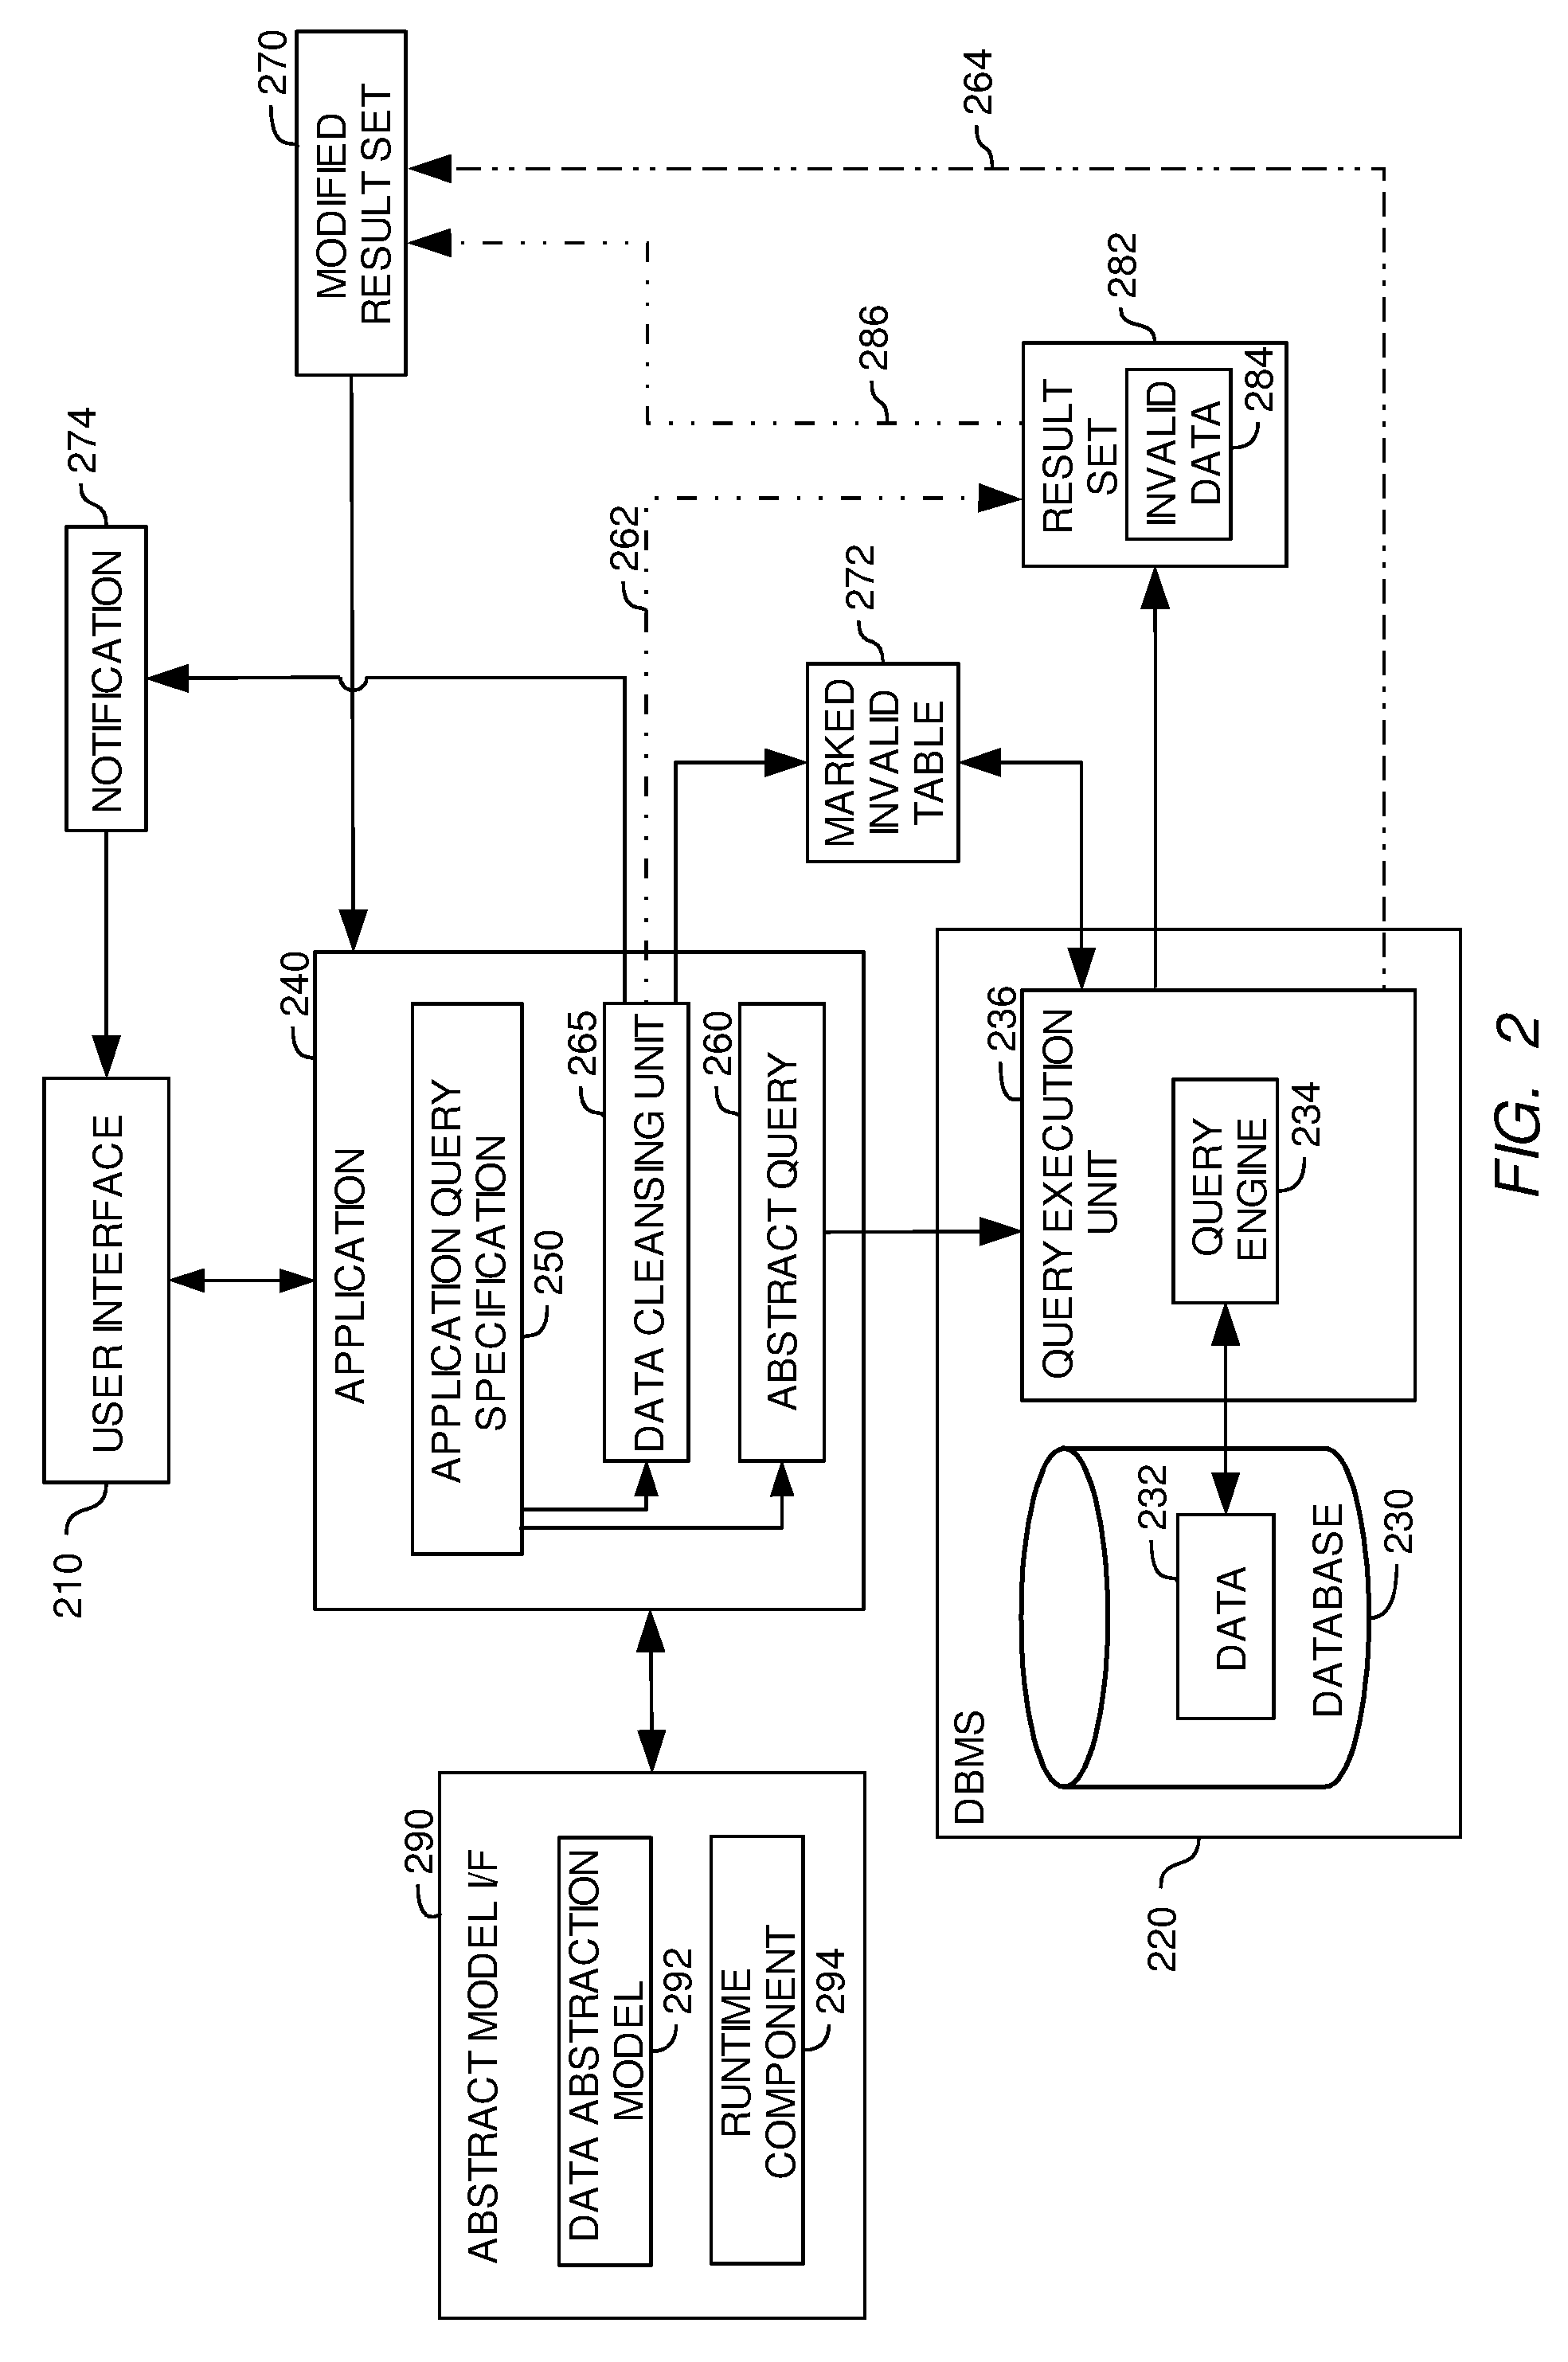 Method and system for performing a clean operation on a query result